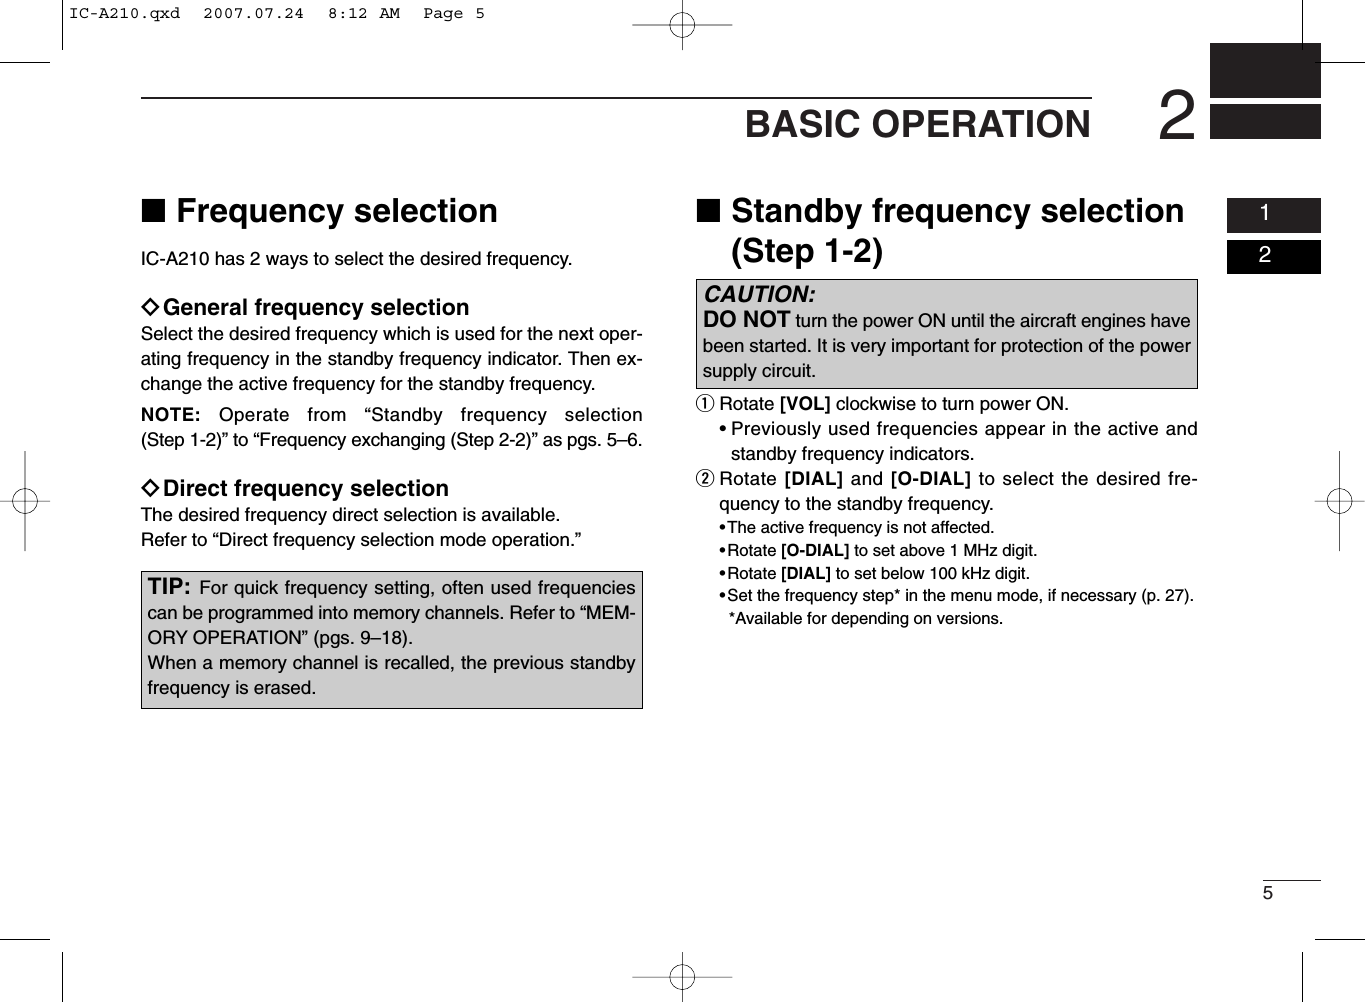 52BASIC OPERATION0102■Frequency selectionIC-A210 has 2 ways to select the desired frequency.ïGeneral frequency selectionSelect the desired frequency which is used for the next oper-ating frequency in the standby frequency indicator. Then ex-change the active frequency for the standby frequency.NOTE: Operate from “Standby frequency selection(Step 1-2)” to “Frequency exchanging (Step 2-2)” as pgs. 5–6.ïDirect frequency selectionThe desired frequency direct selection is available.Refer to “Direct frequency selection mode operation.”■Standby frequency selection(Step 1-2)qRotate [VOL] clockwise to turn power ON.• Previously used frequencies appear in the active andstandby frequency indicators.wRotate [DIAL] and [O-DIAL] to select the desired fre-quency to the standby frequency.• The active frequency is not affected.• Rotate [O-DIAL] to set above 1 MHz digit.• Rotate [DIAL] to set below 100 kHz digit.•Set the frequency step* in the menu mode, if necessary (p. 27).*Available for depending on versions.TIP: For quick frequency setting, often used frequenciescan be programmed into memory channels. Refer to “MEM-ORY OPERATION” (pgs. 9–18).When a memory channel is recalled, the previous standbyfrequency is erased.CAUTION: DO NOT turn the power ON until the aircraft engines havebeen started. It is very important for protection of the powersupply circuit.IC-A210.qxd  2007.07.24  8:12 AM  Page 5